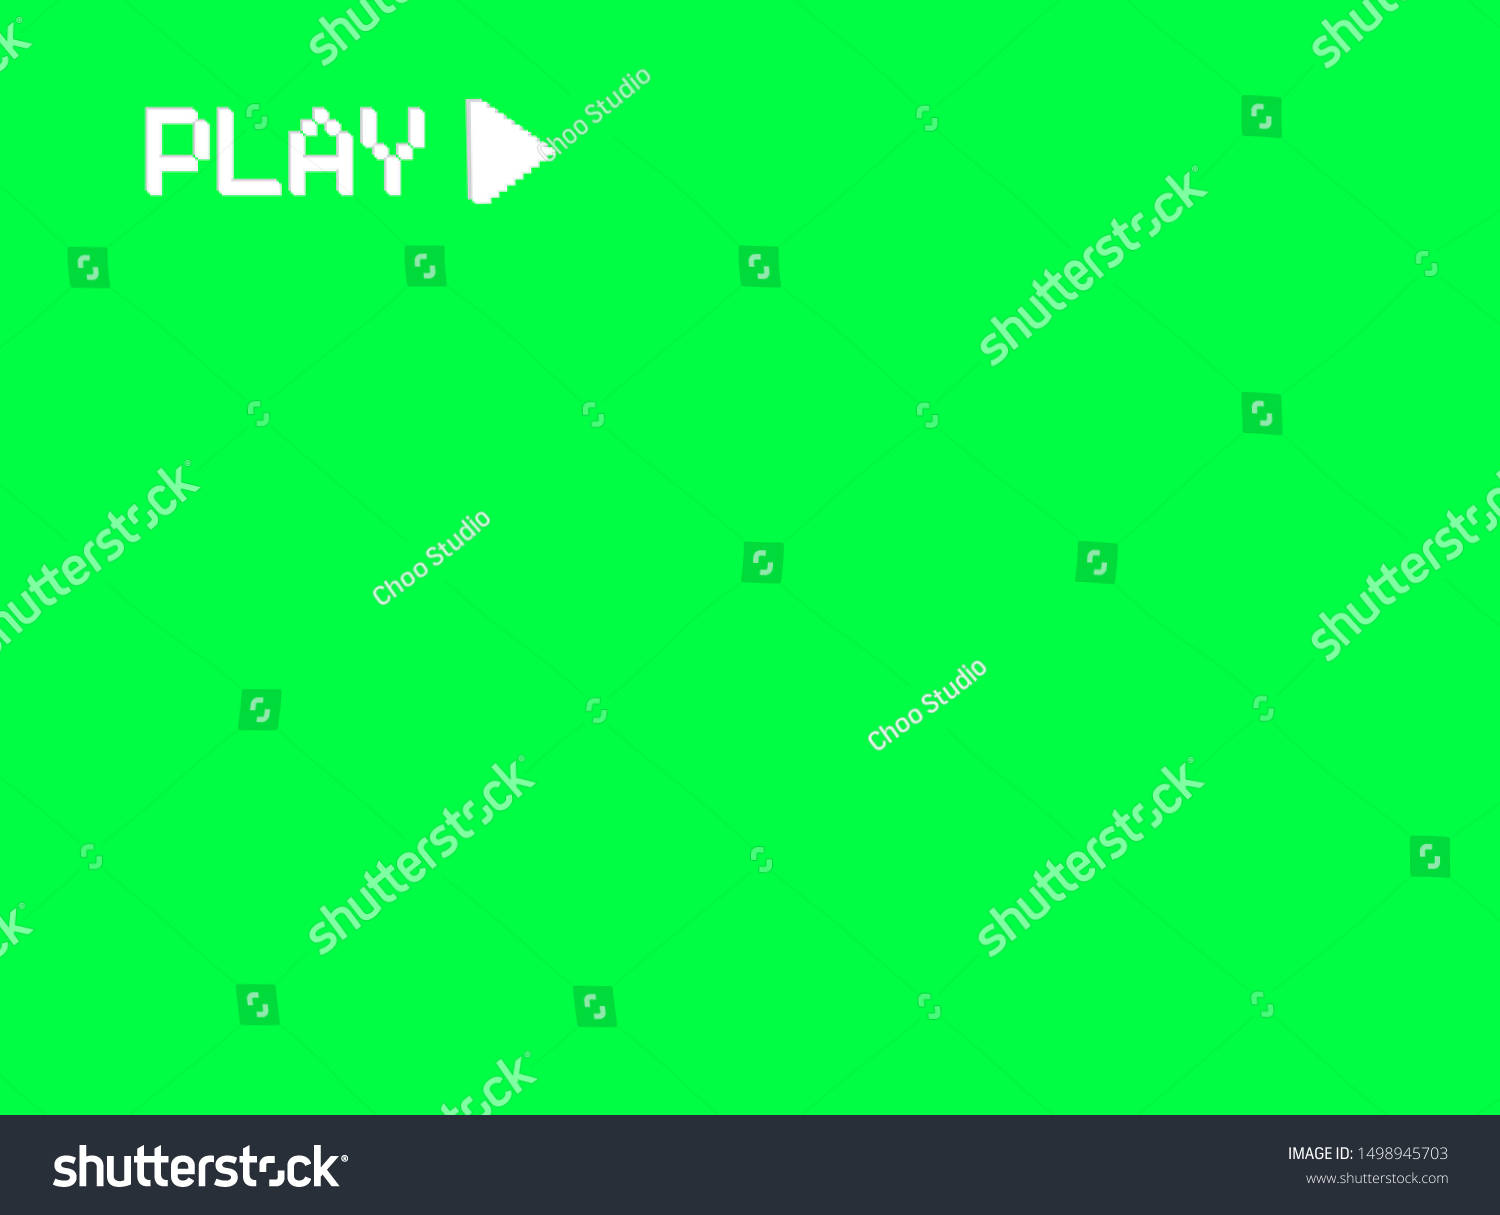 SVG of VHS play screen of a videotape player. Retro 80s style vintage television video recorder pixel art background. Green screen chromakey vector svg